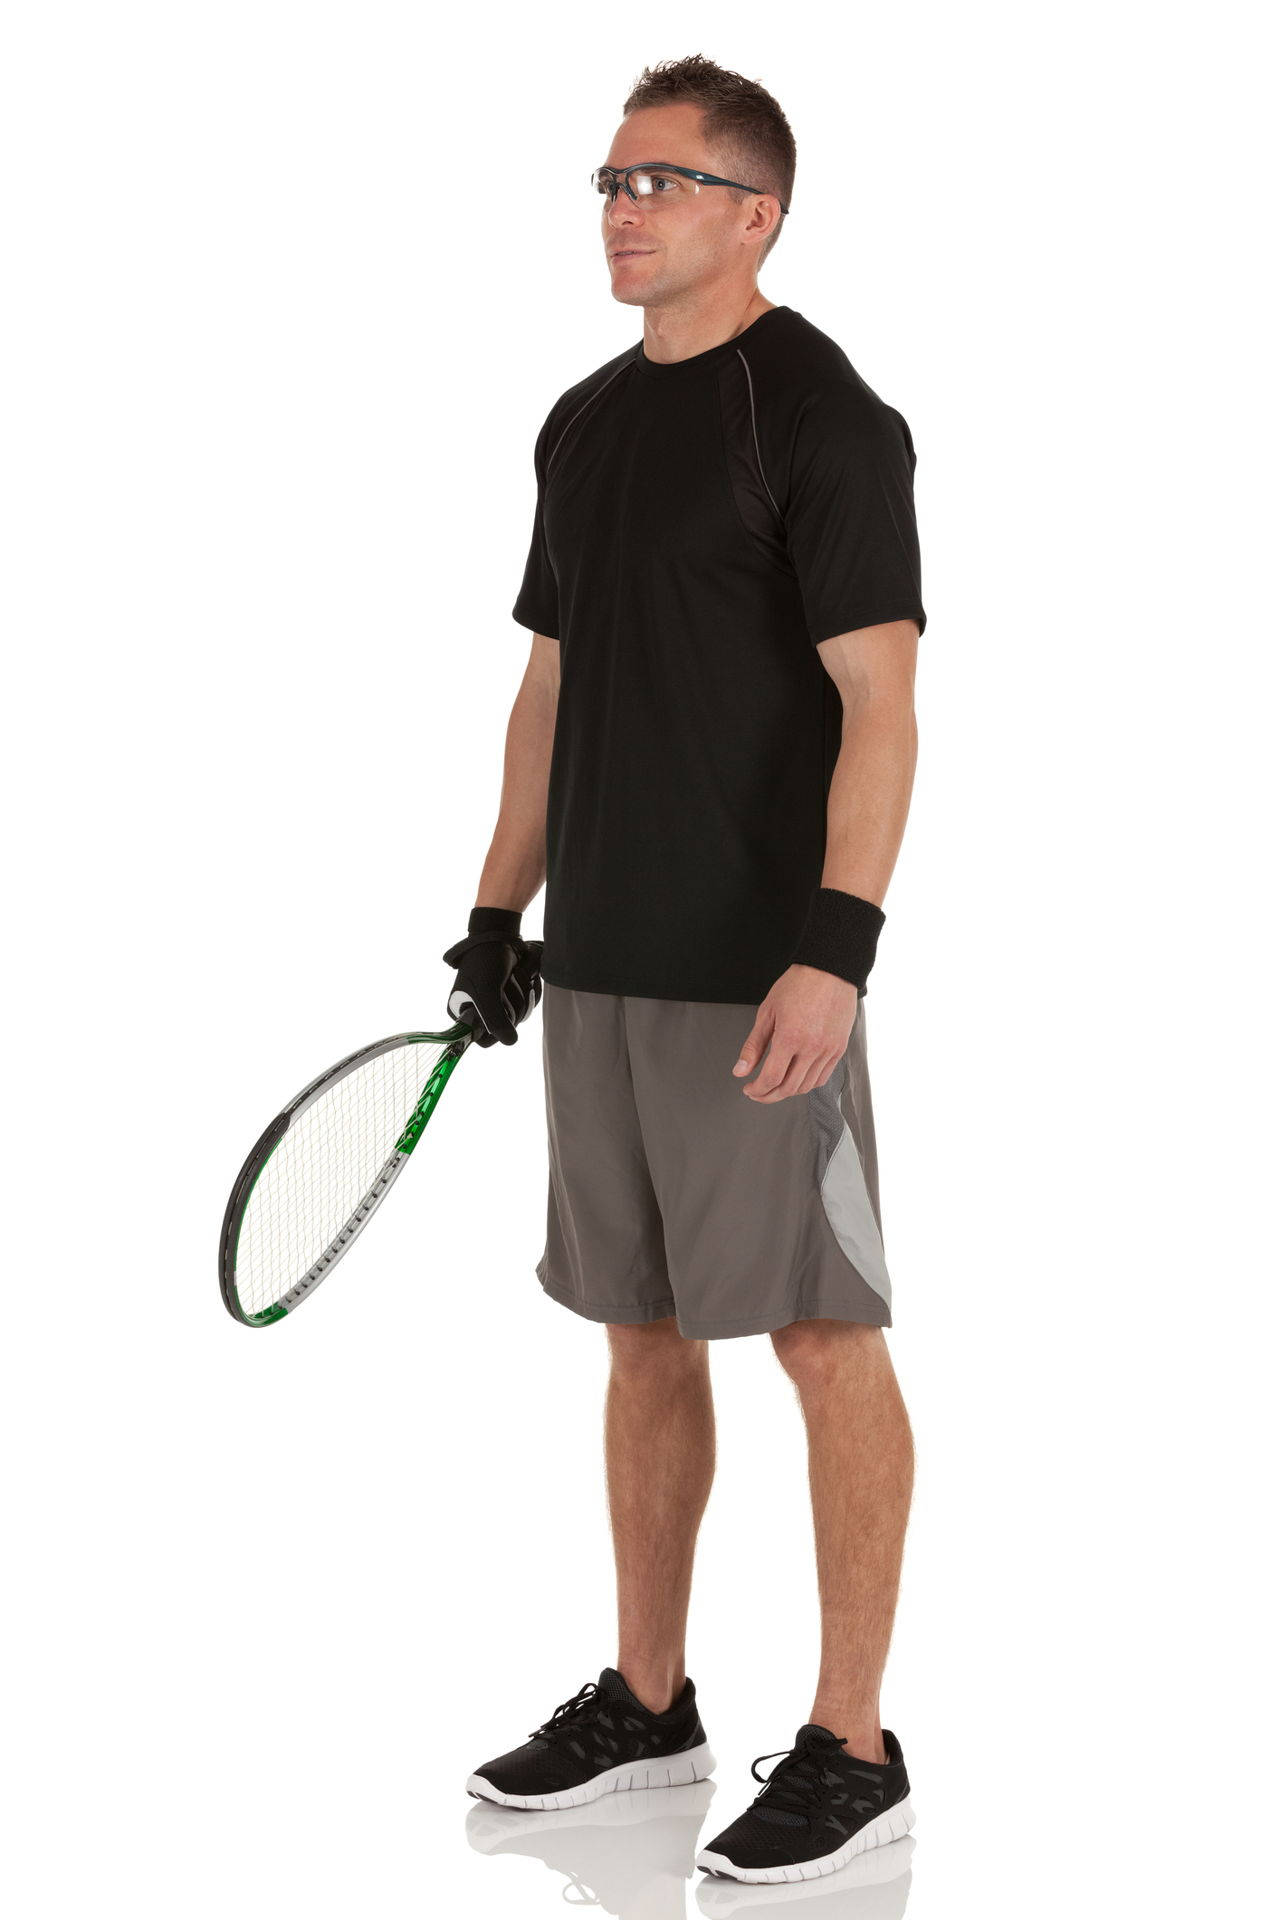 Passionate Racquetball Player Ready for Action Wallpaper